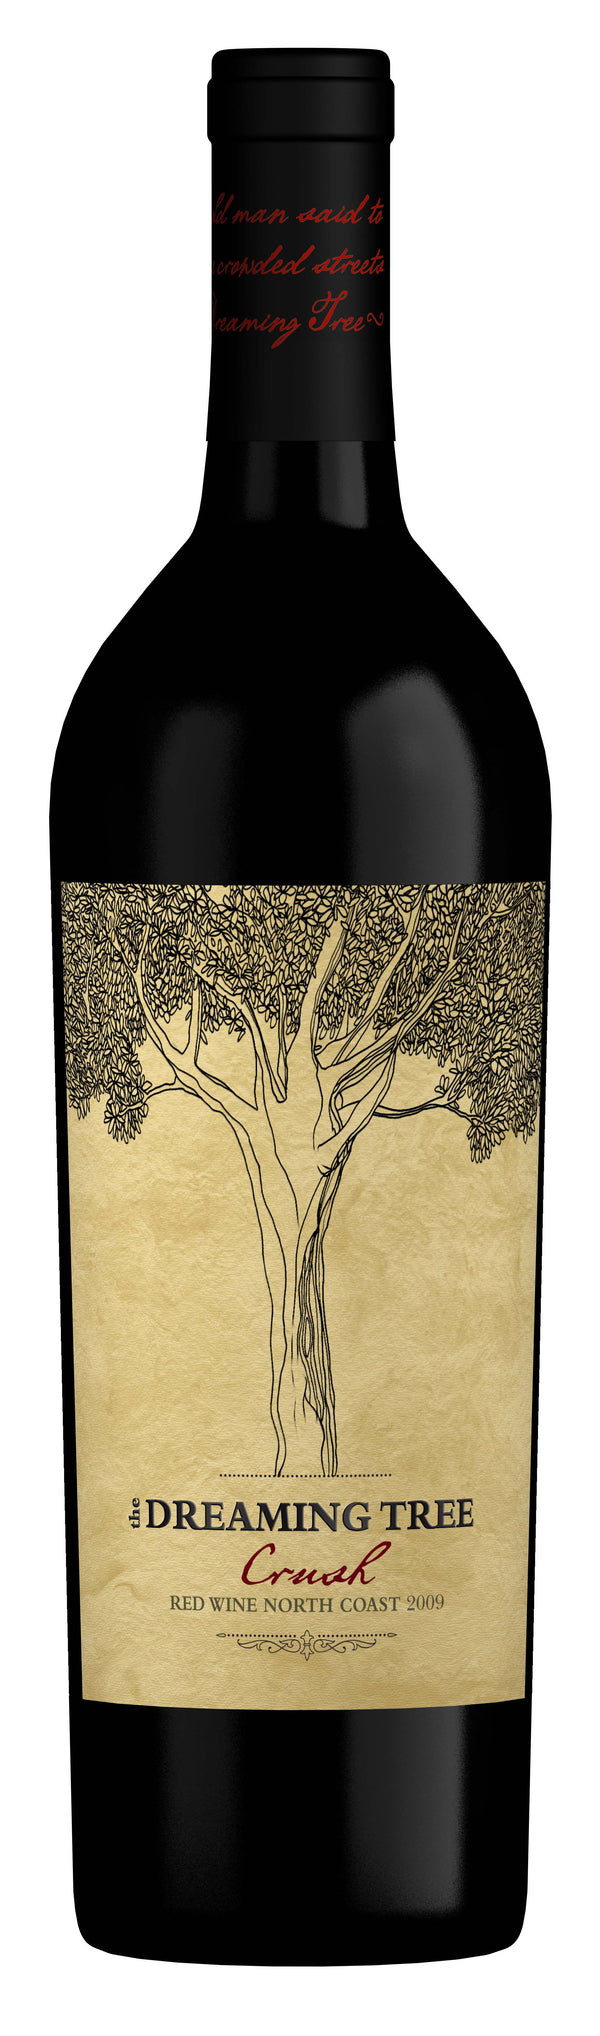 The Dreaming Tree Red Blend, North Coast